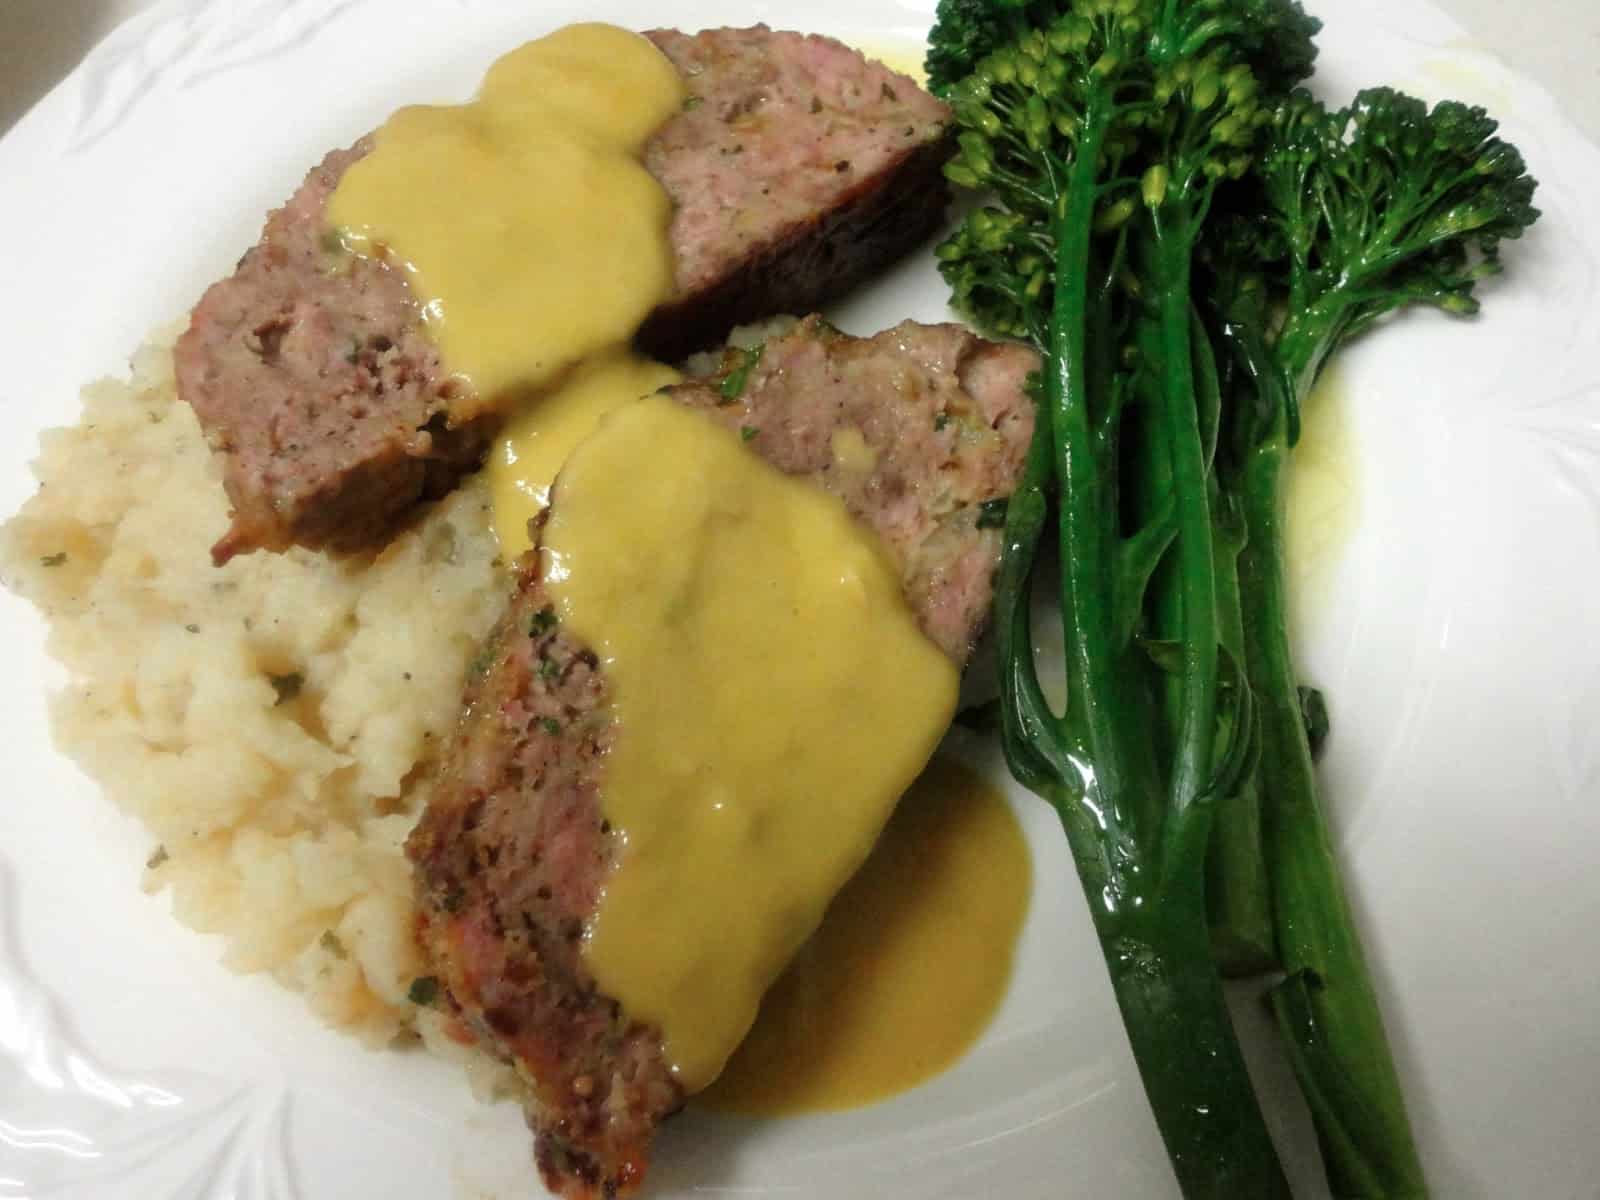 1770 House Meatloaf with Garlic Sauce from Ina Garten’s “Barefoot Contessa Foolproof”